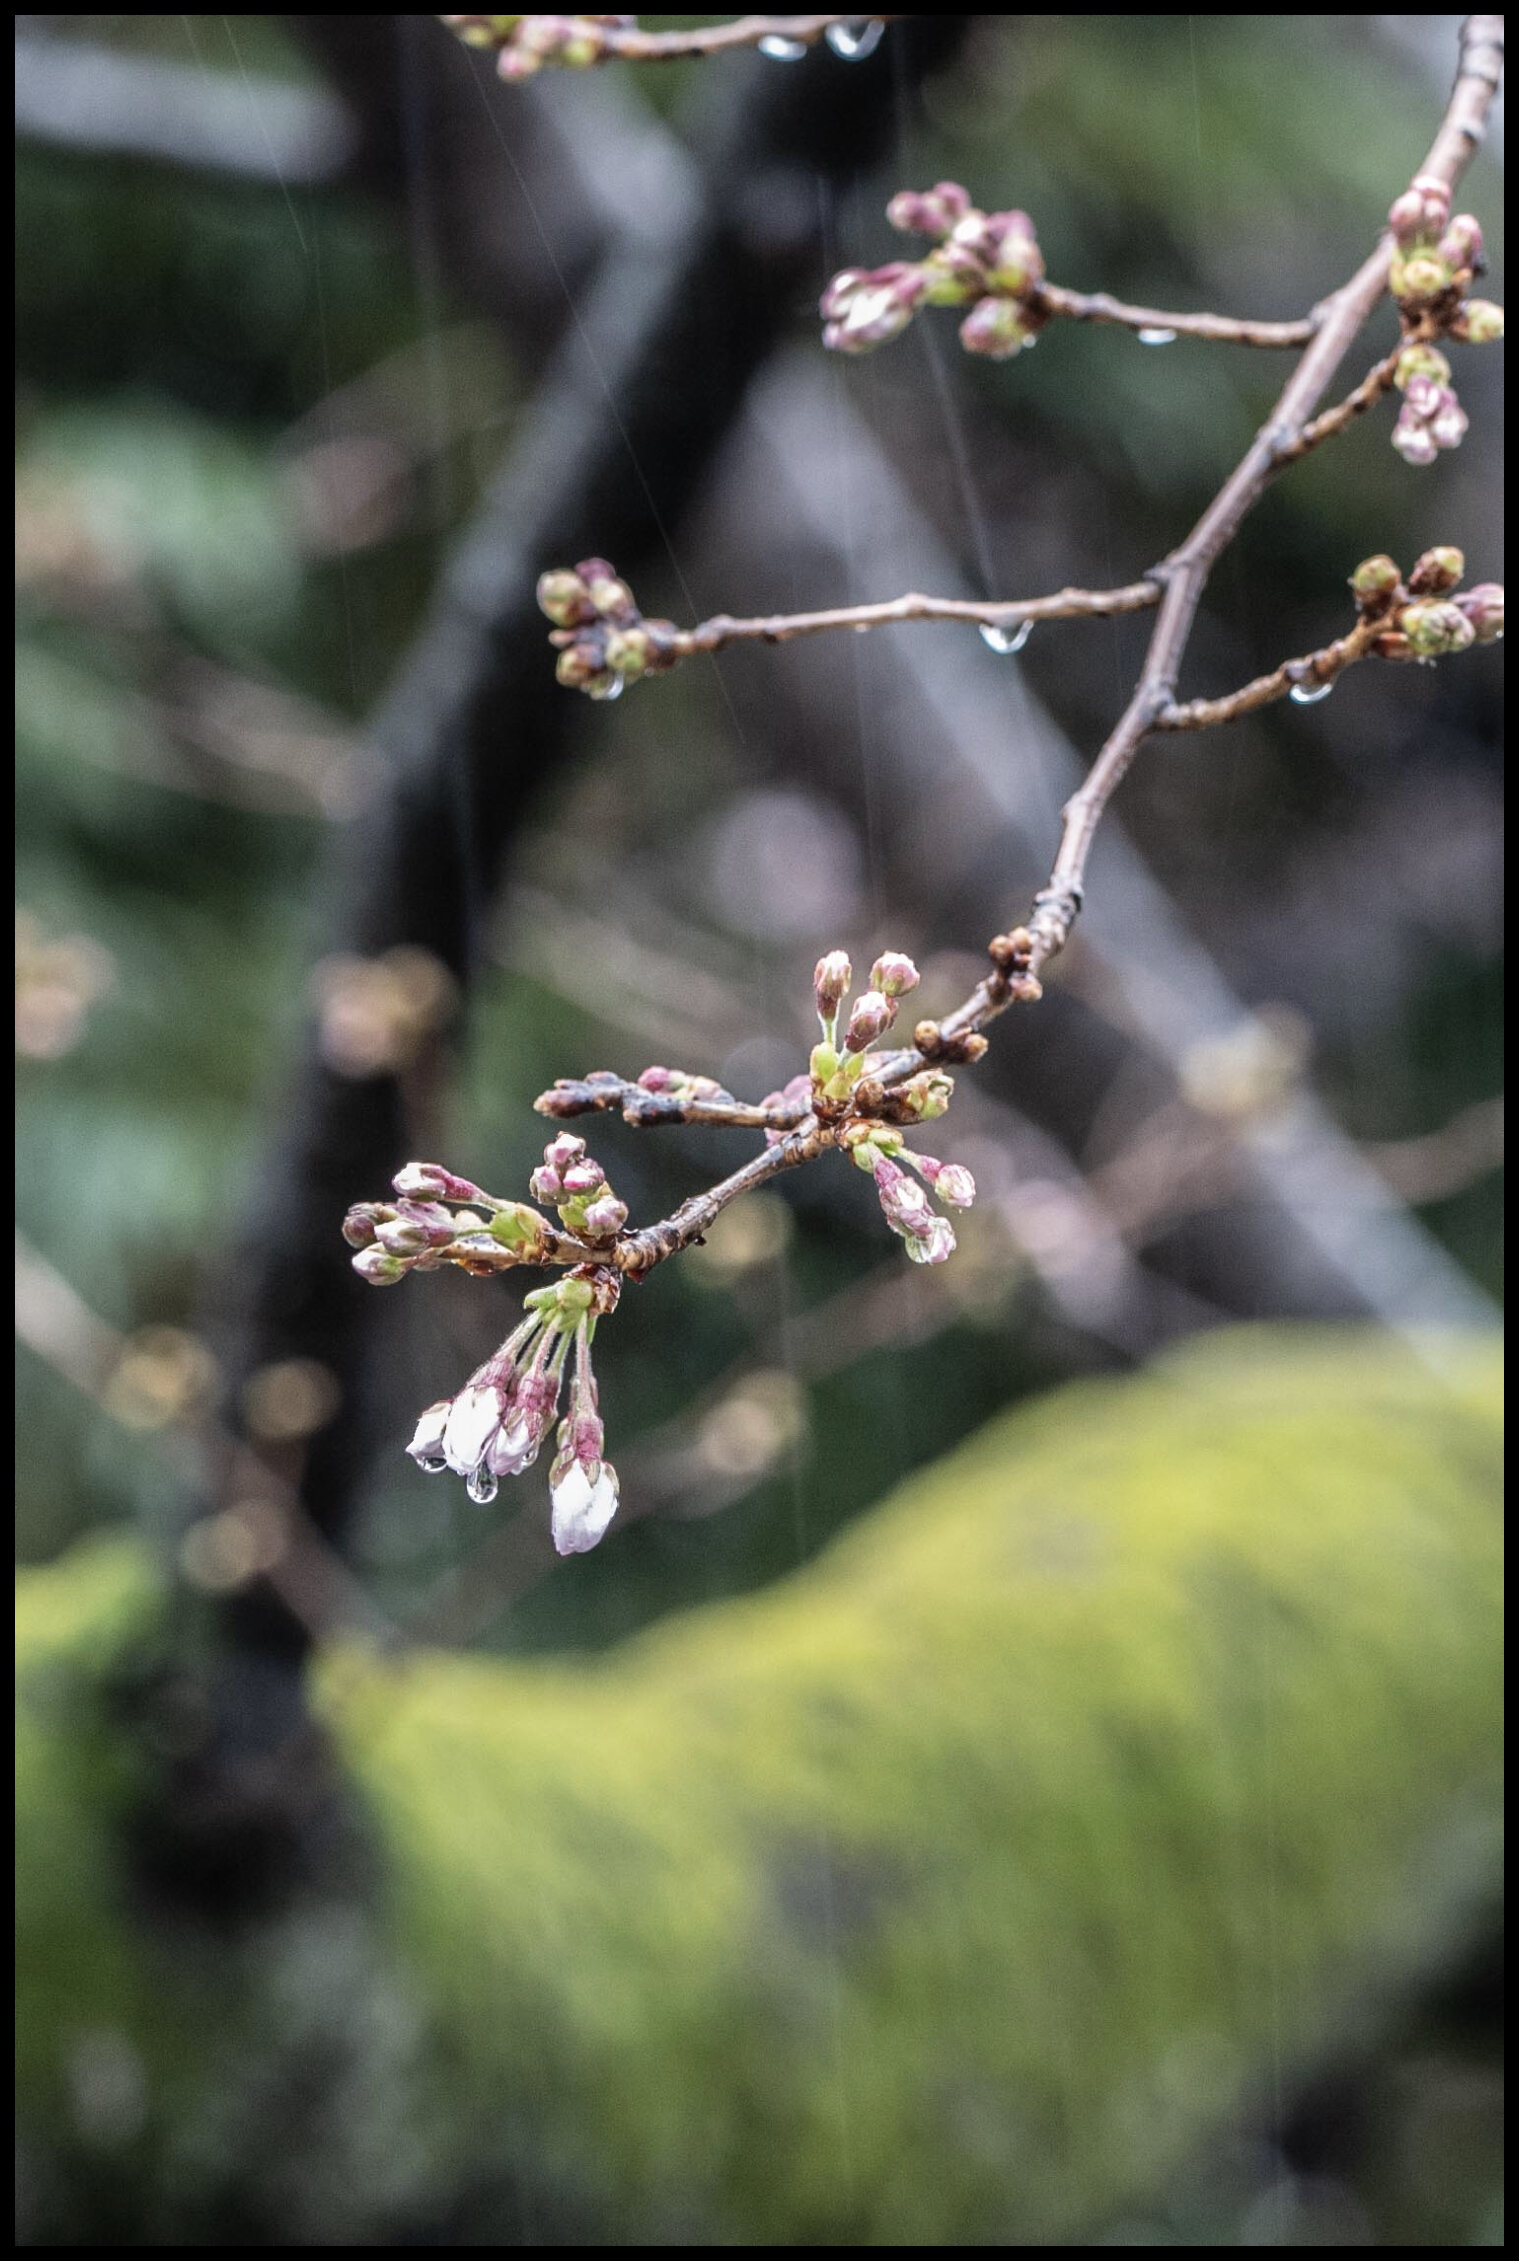  The Japan Meteorological Agency (JMA) announced on March 14th that it observed cherry blossoms blooming in central Tokyo, the earliest ever recorded in observation history.  The official observation, carried out by a staff member of the Tokyo Metrop